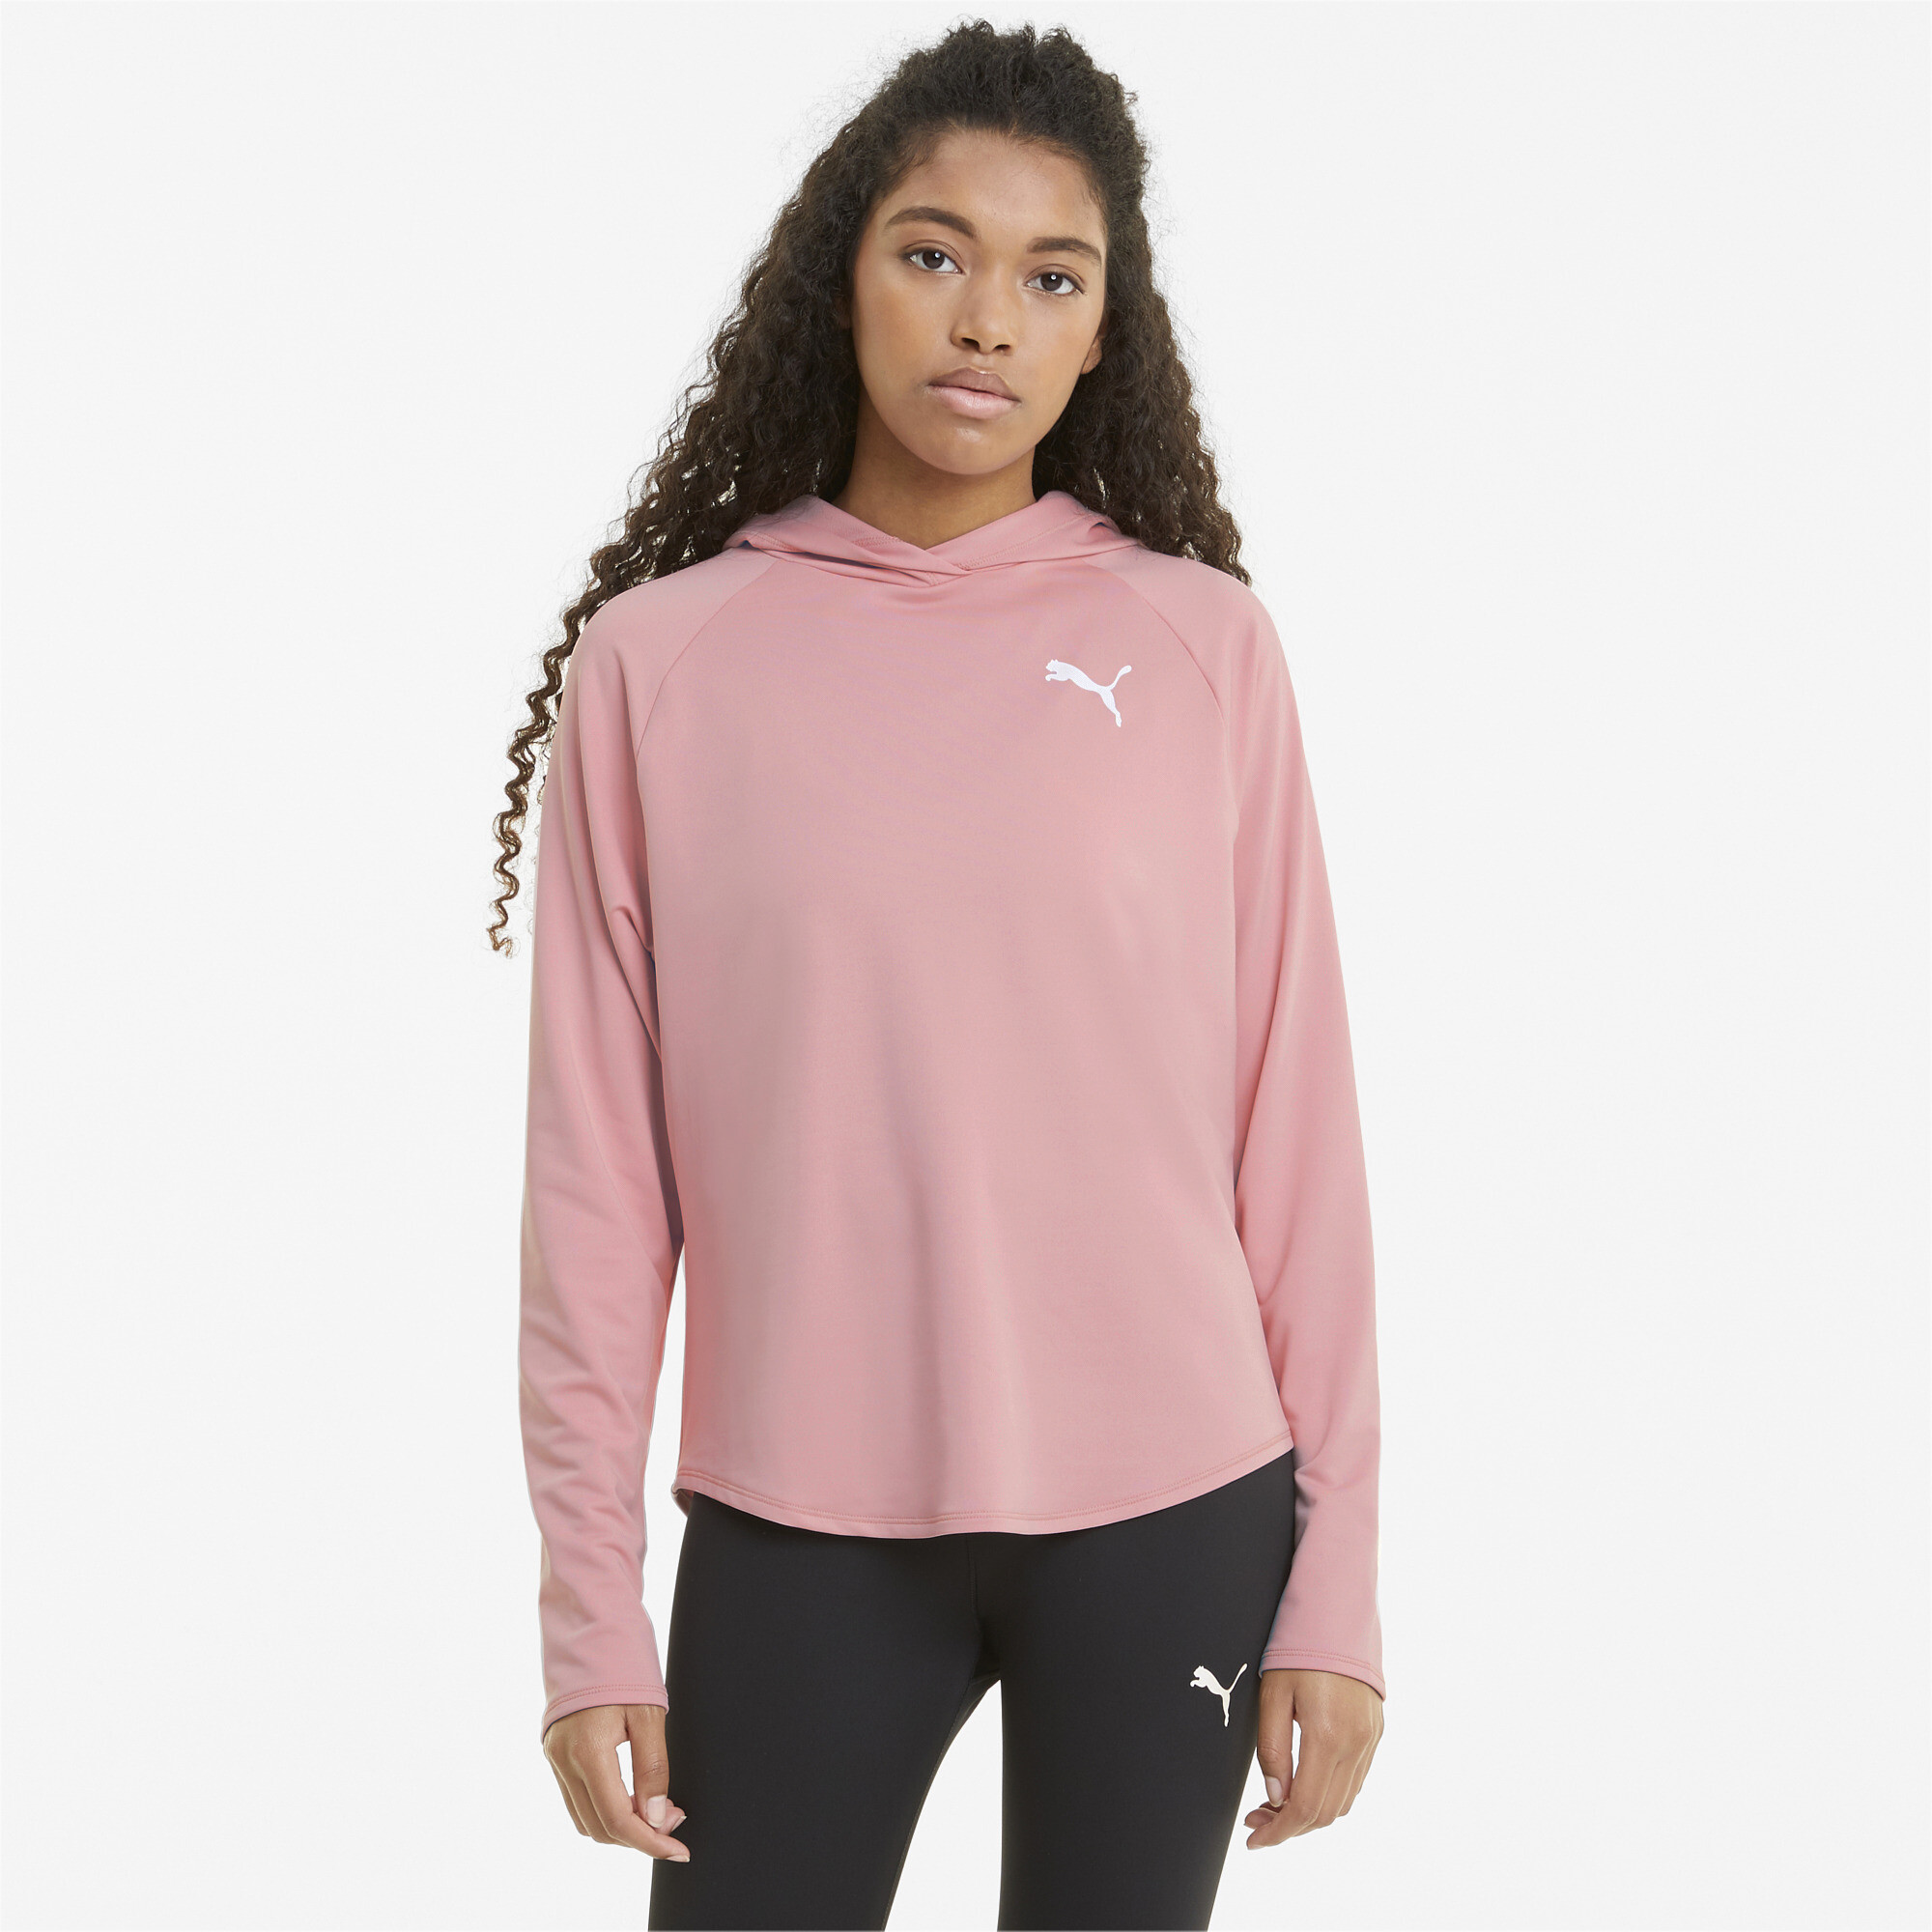 Women's Puma Active's Hoodie, Pink, Size S, Clothing